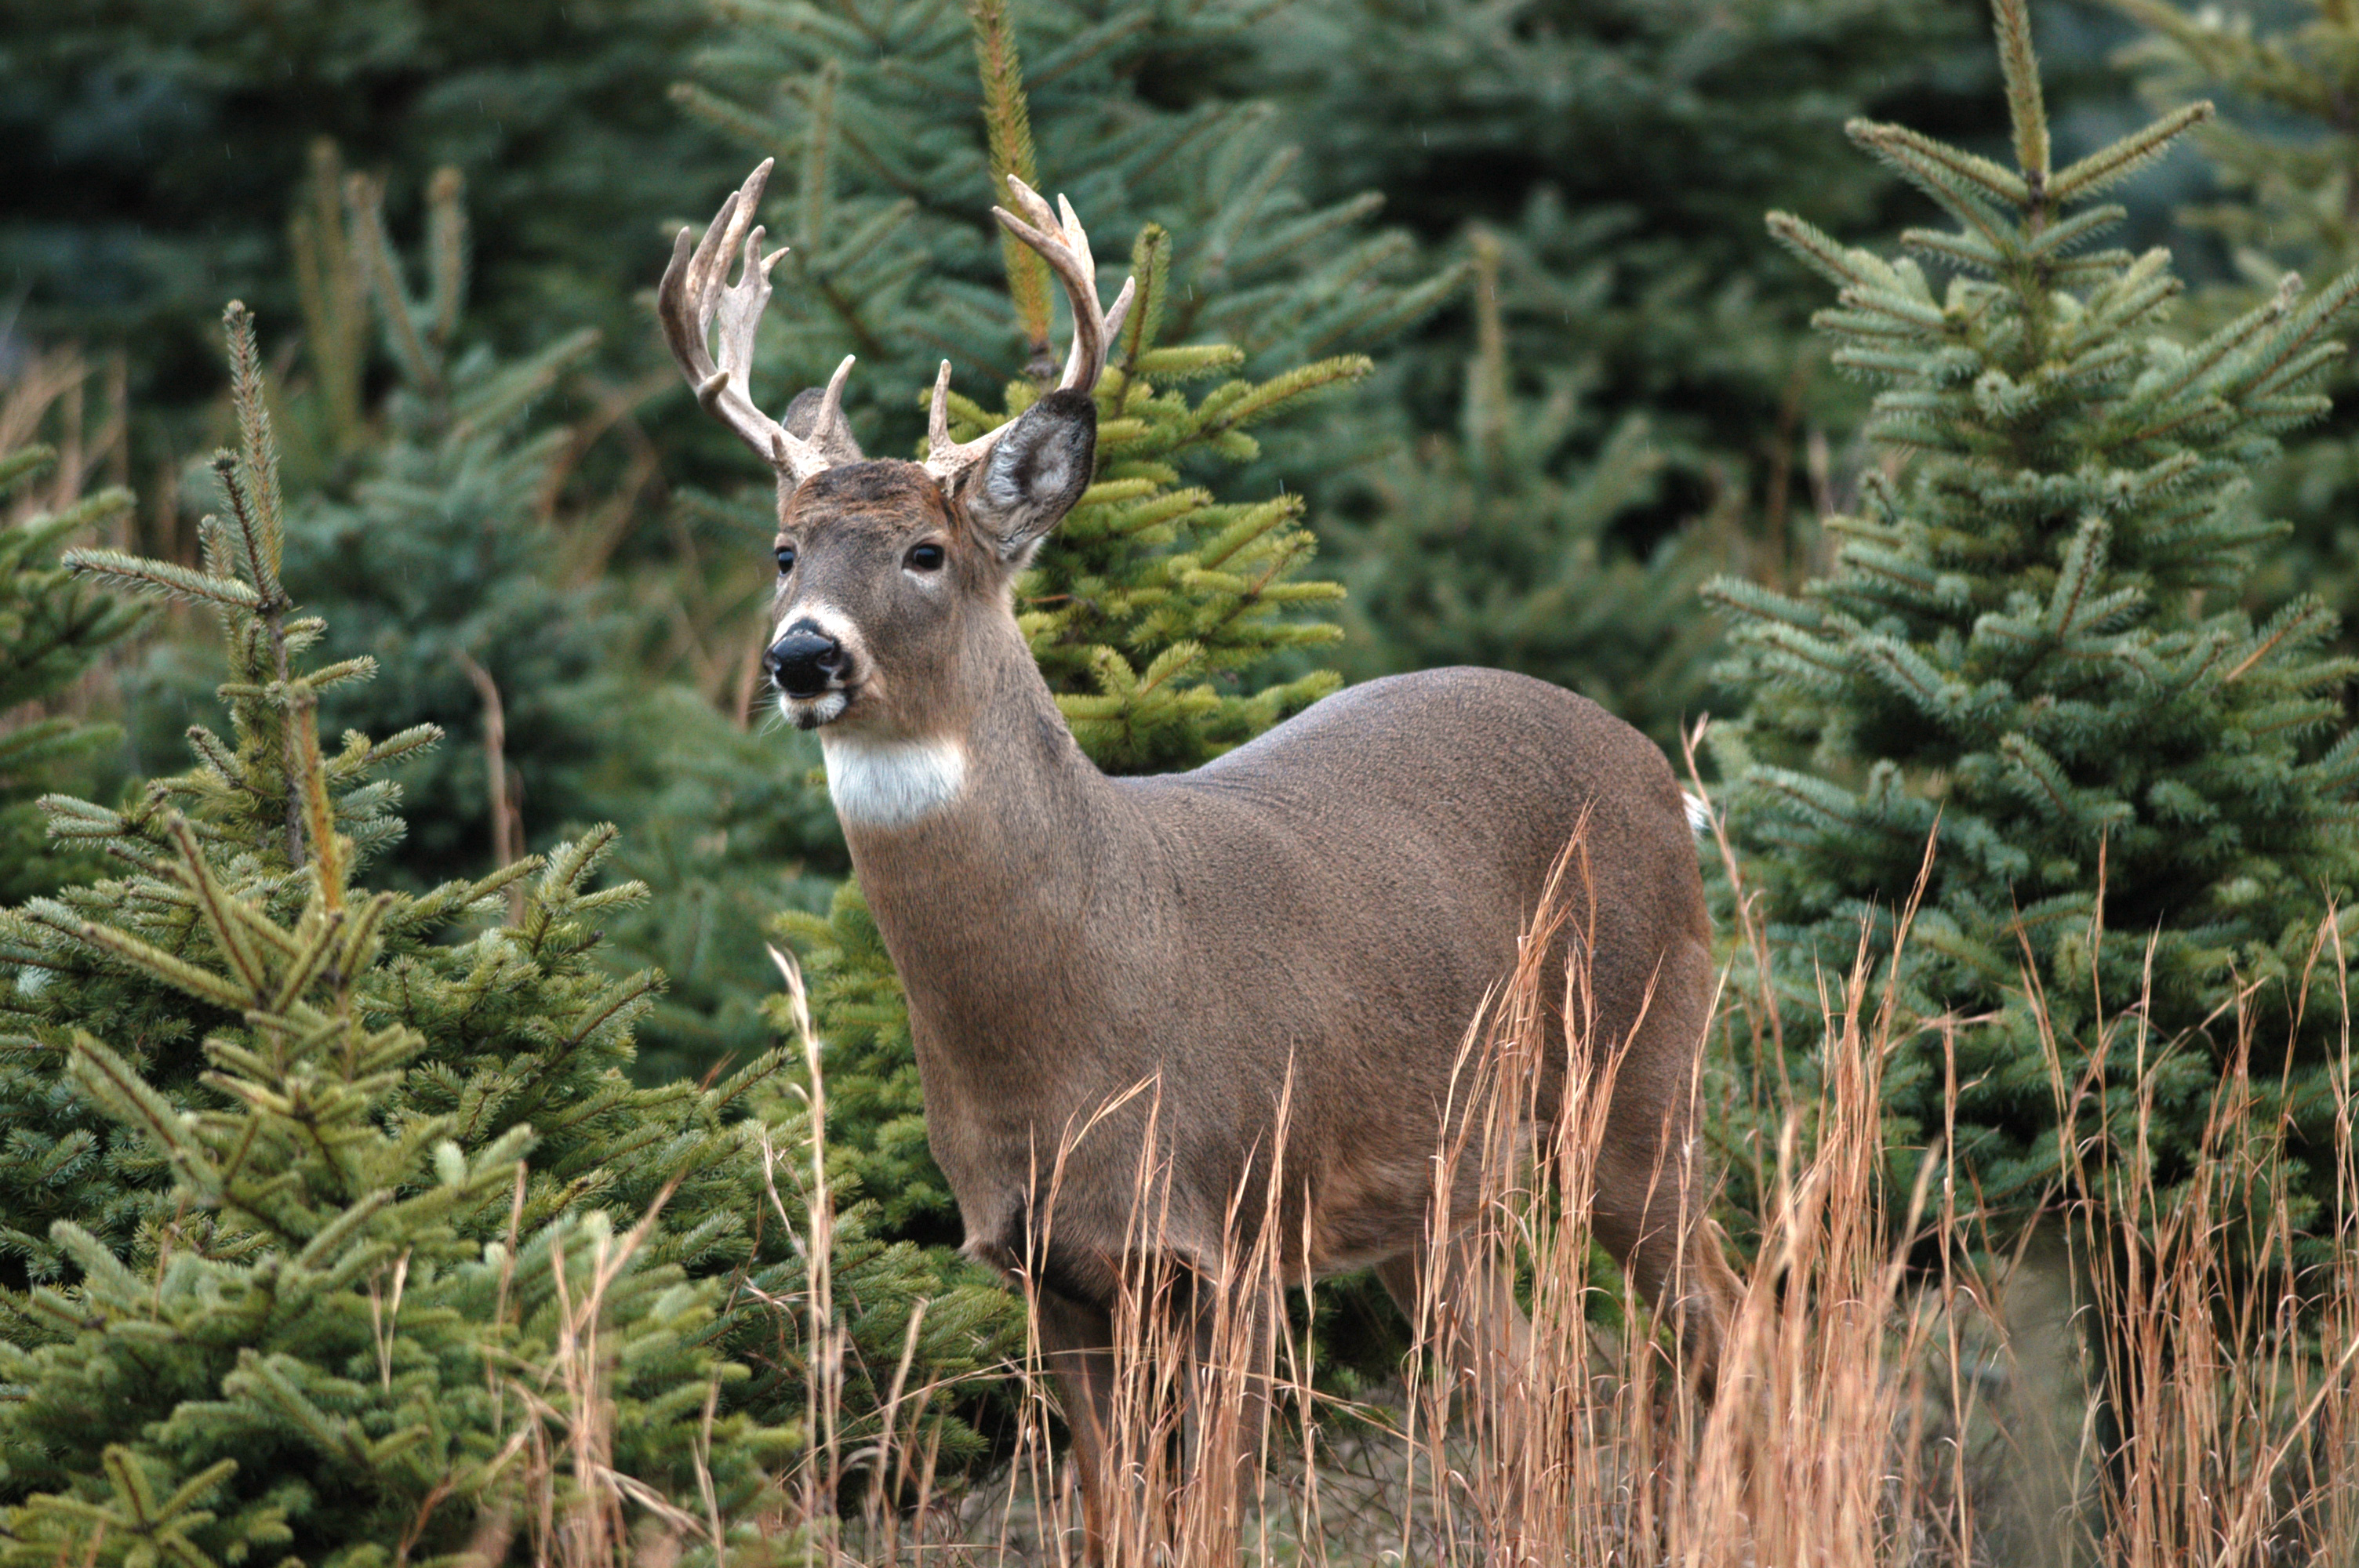 The odds of a motorist hitting a deer in West Virginia are roughly one in 4...